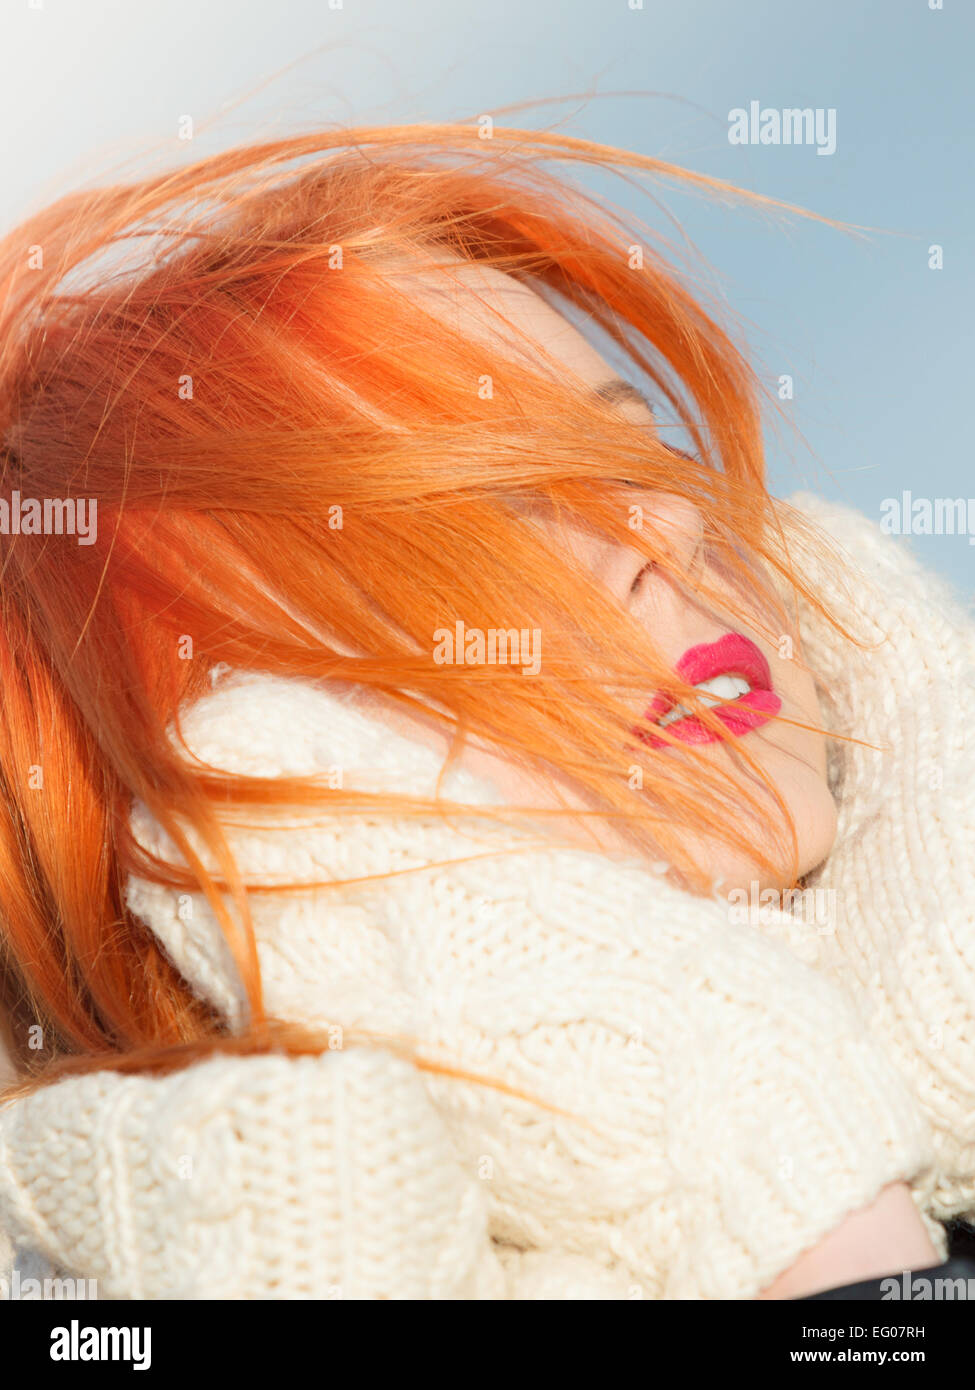 Winter fashion. Beauty redhaired head with hair blowing on wind, woman in warm clothing outdoor enjoying sunlight. Stock Photo